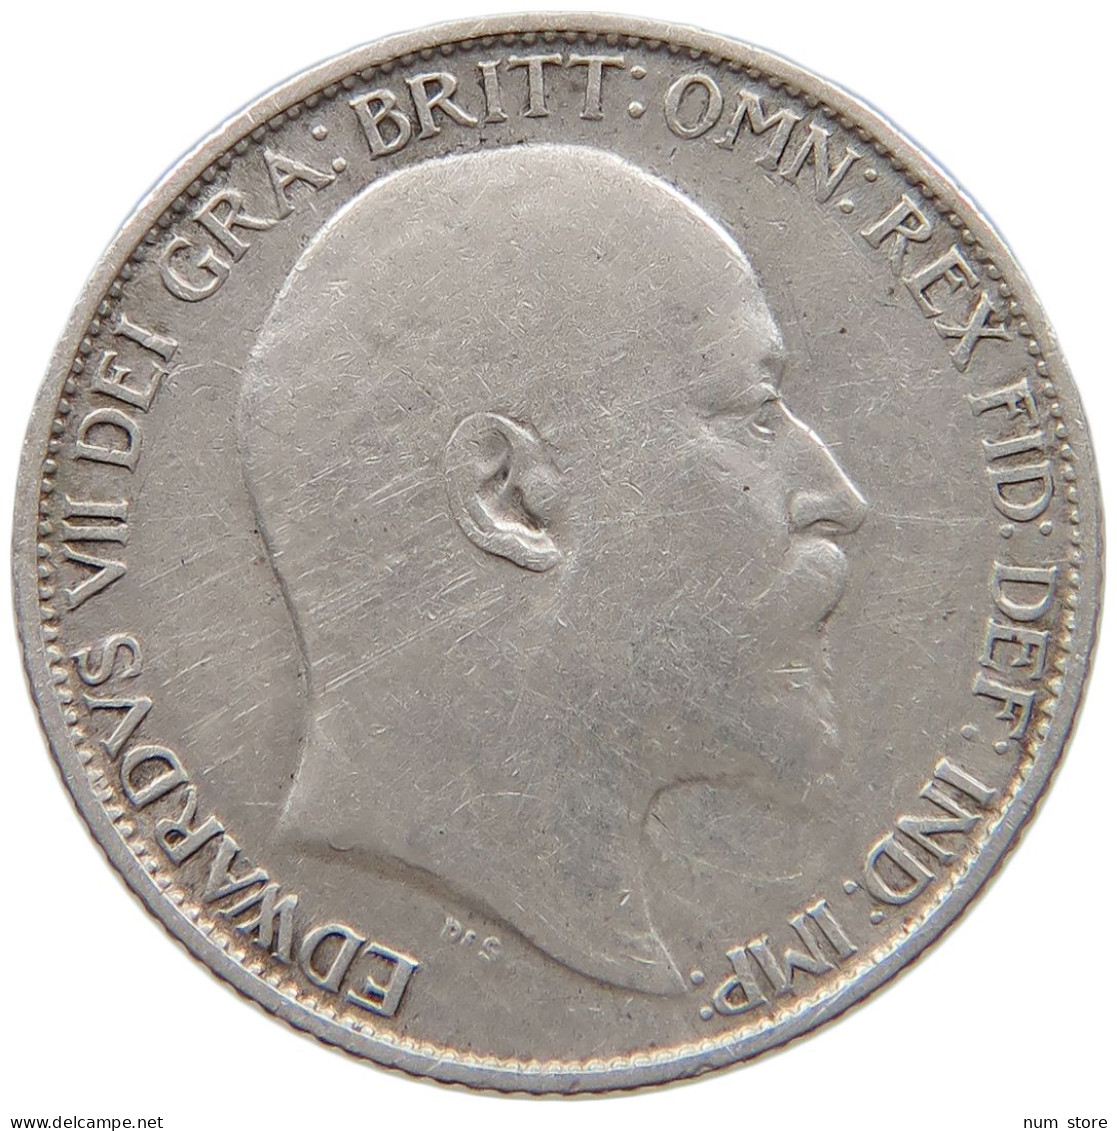 GREAT BRITAIN SIXPENCE 1906 Edward VII., 1901 - 1910 #t158 0395 - H. 6 Pence